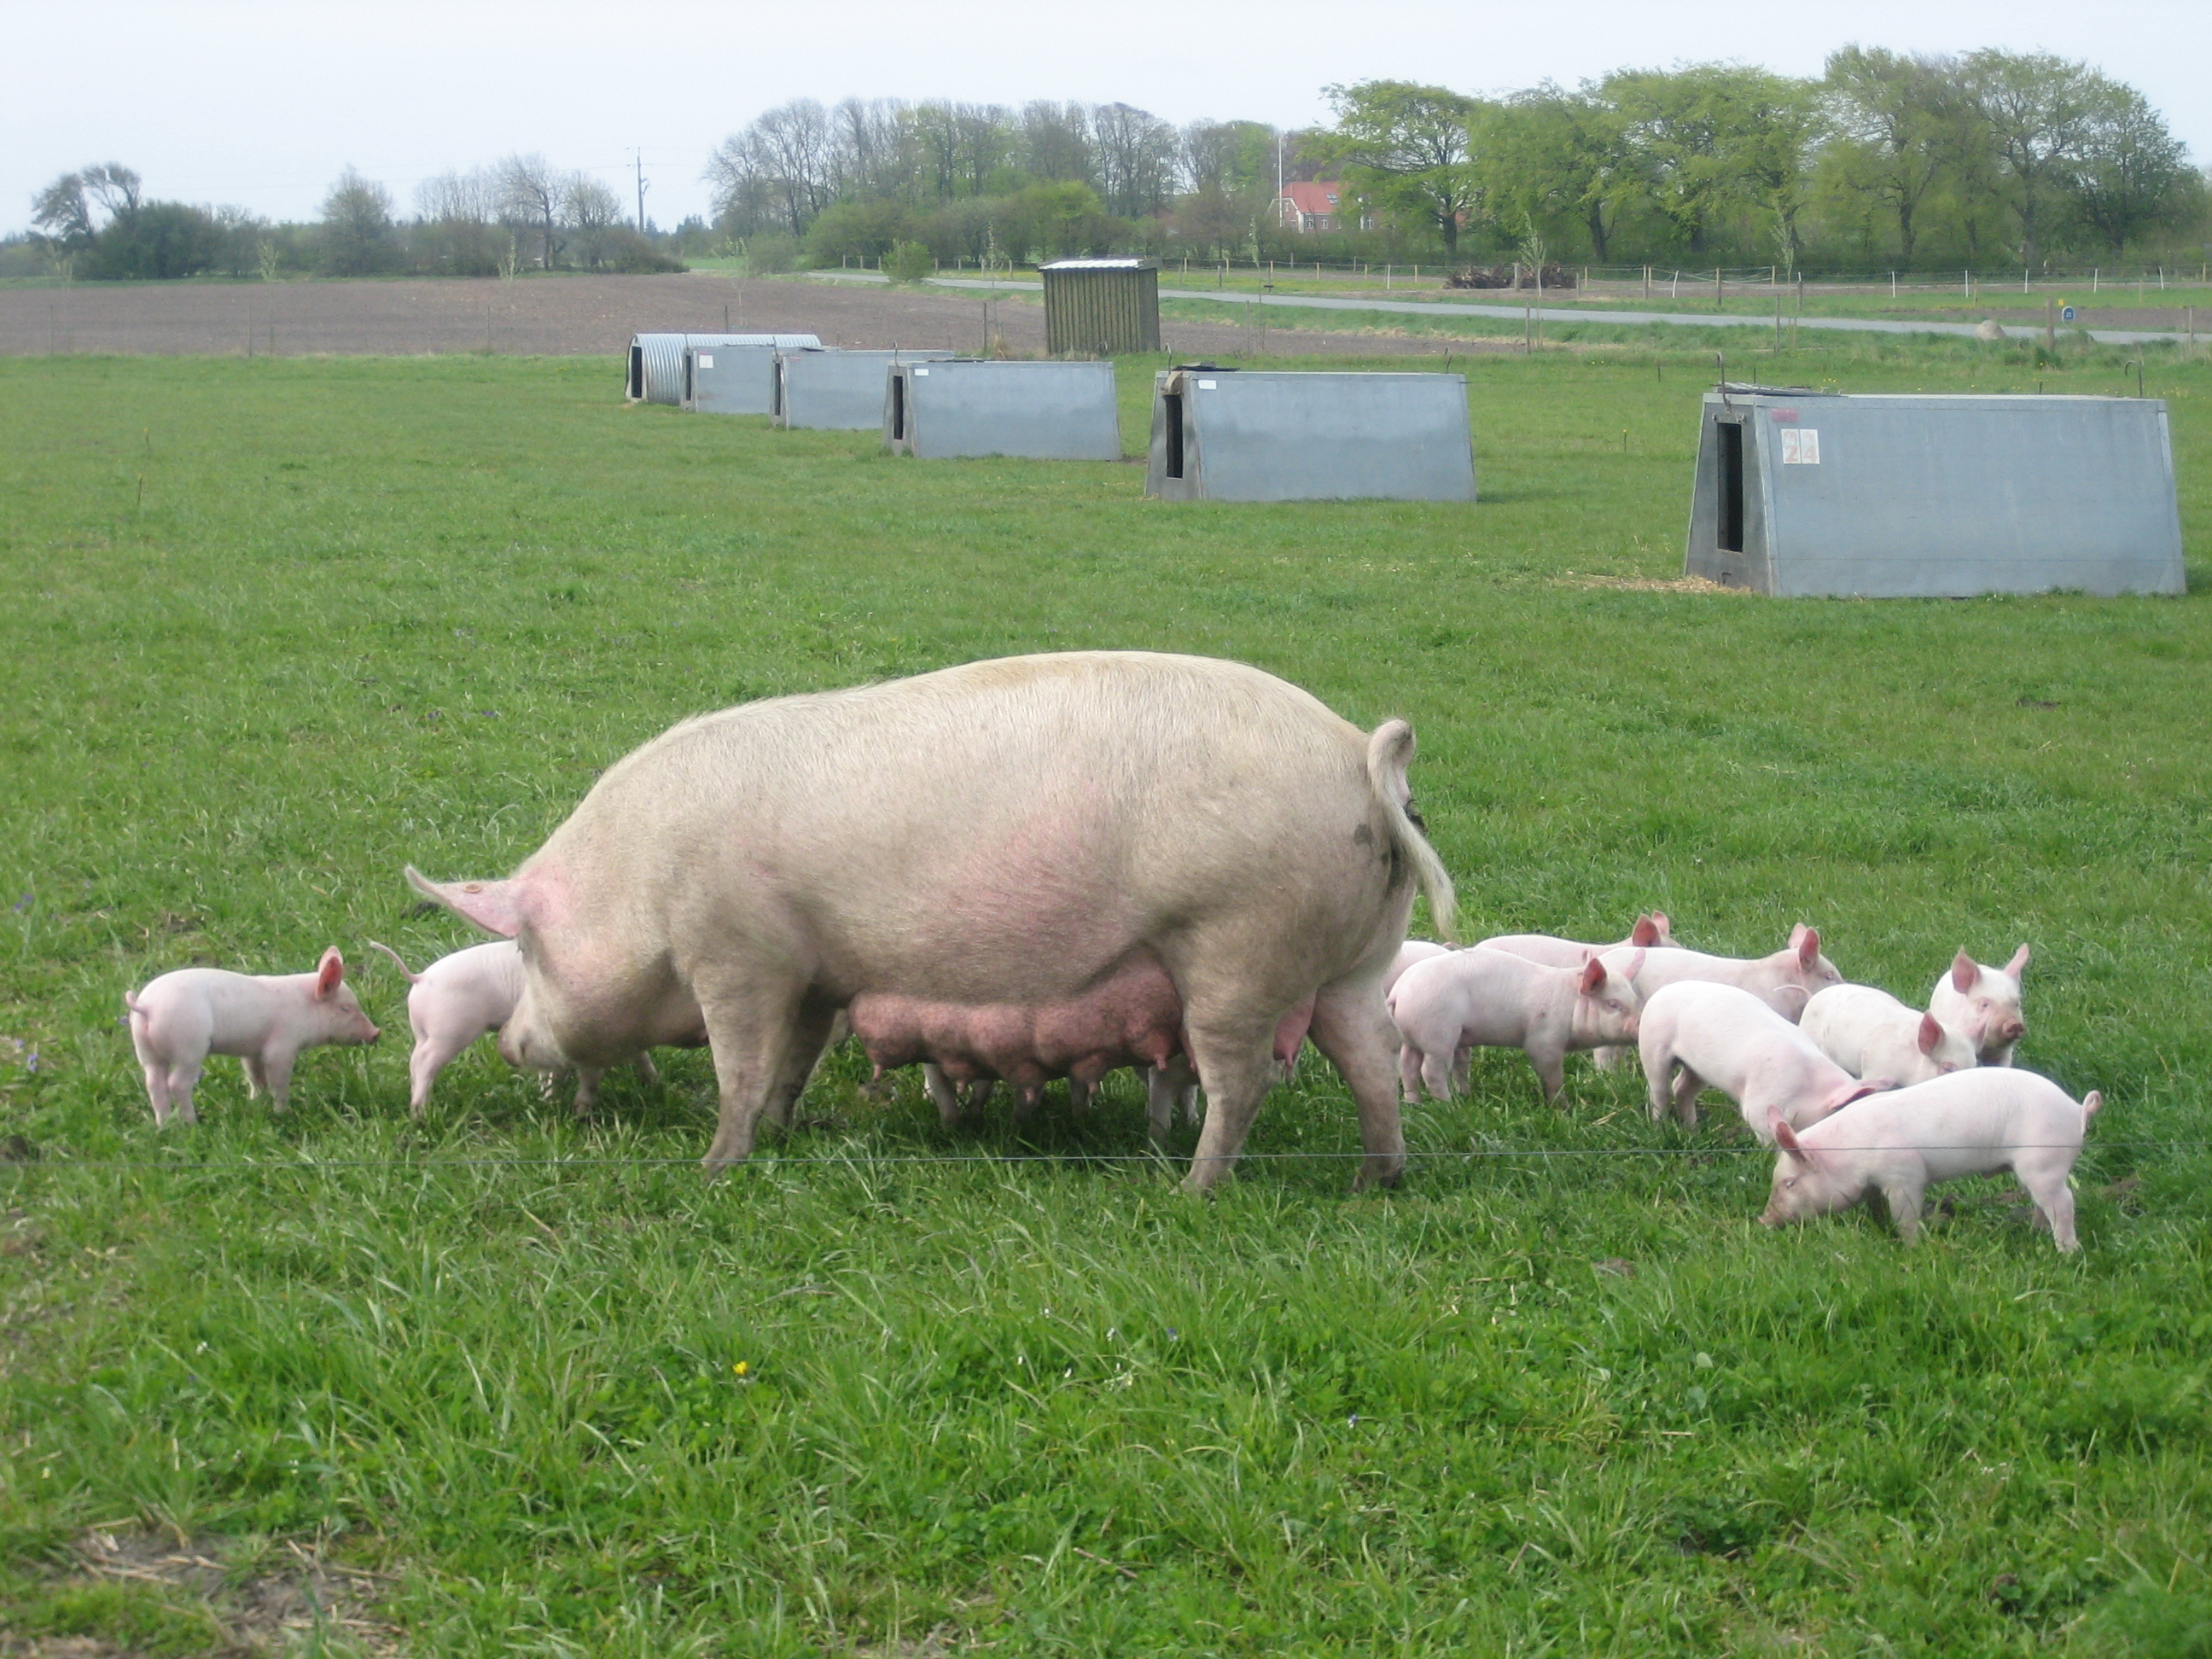 Danish pig farmers face difficult times